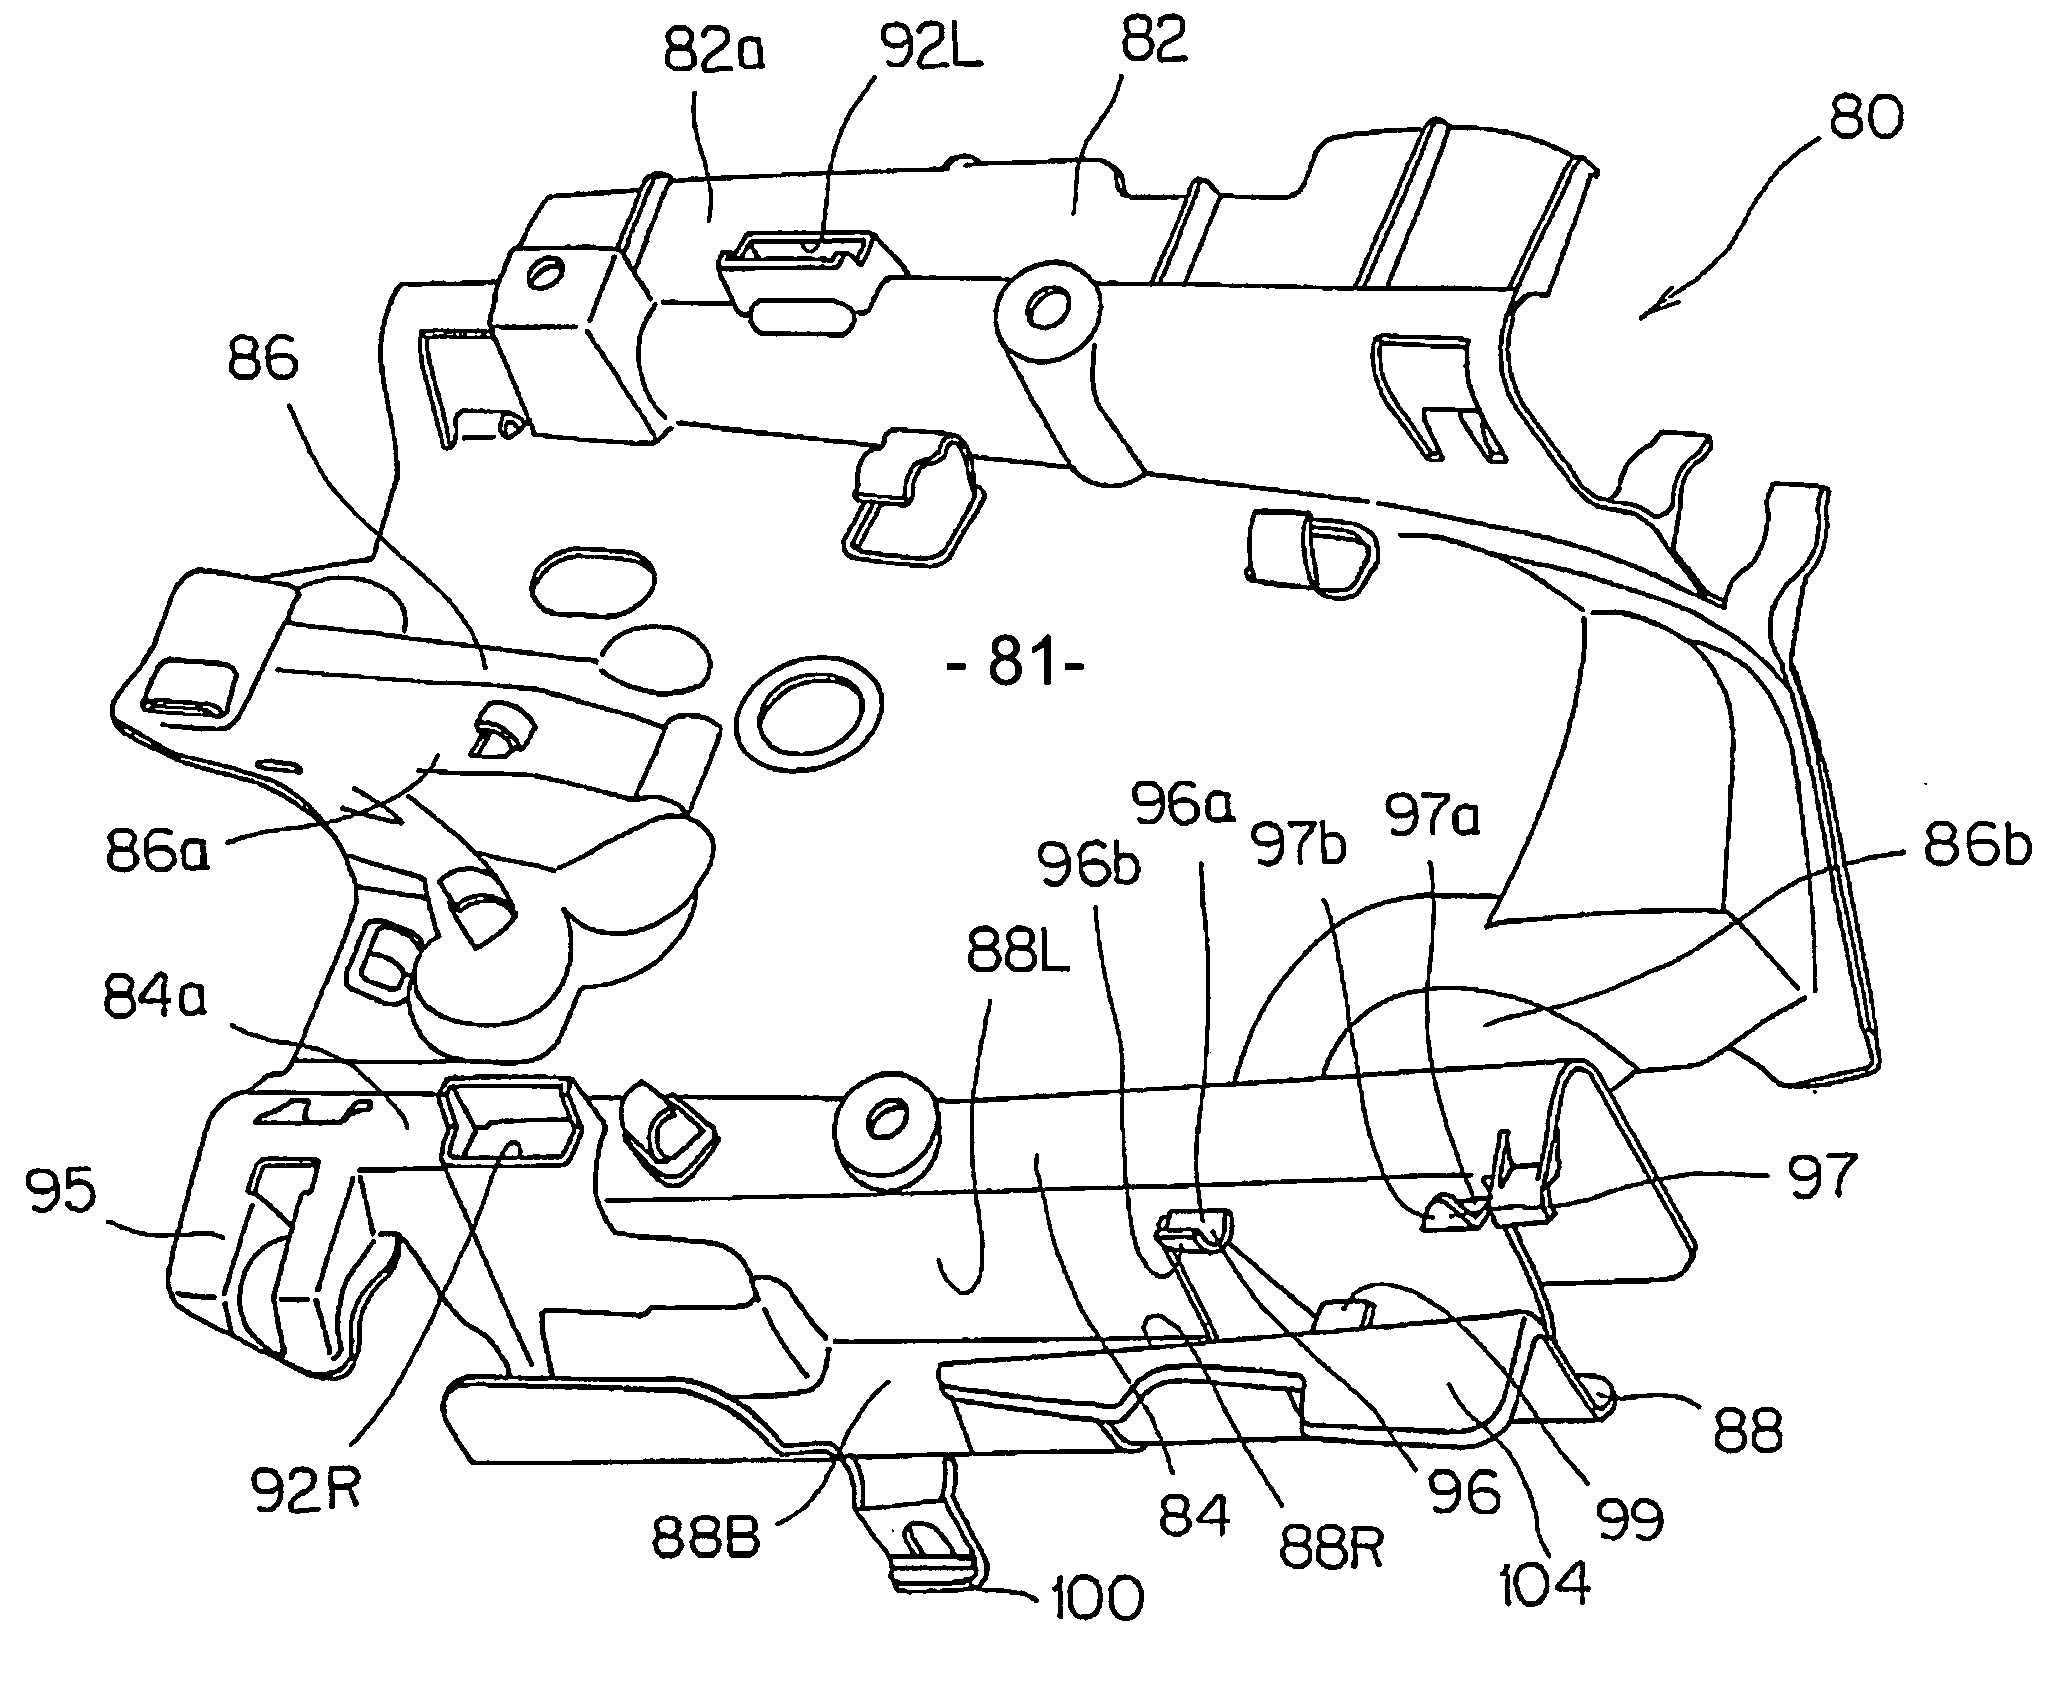 Combined heat shield and wire-holding structure for a saddle-type vehicle